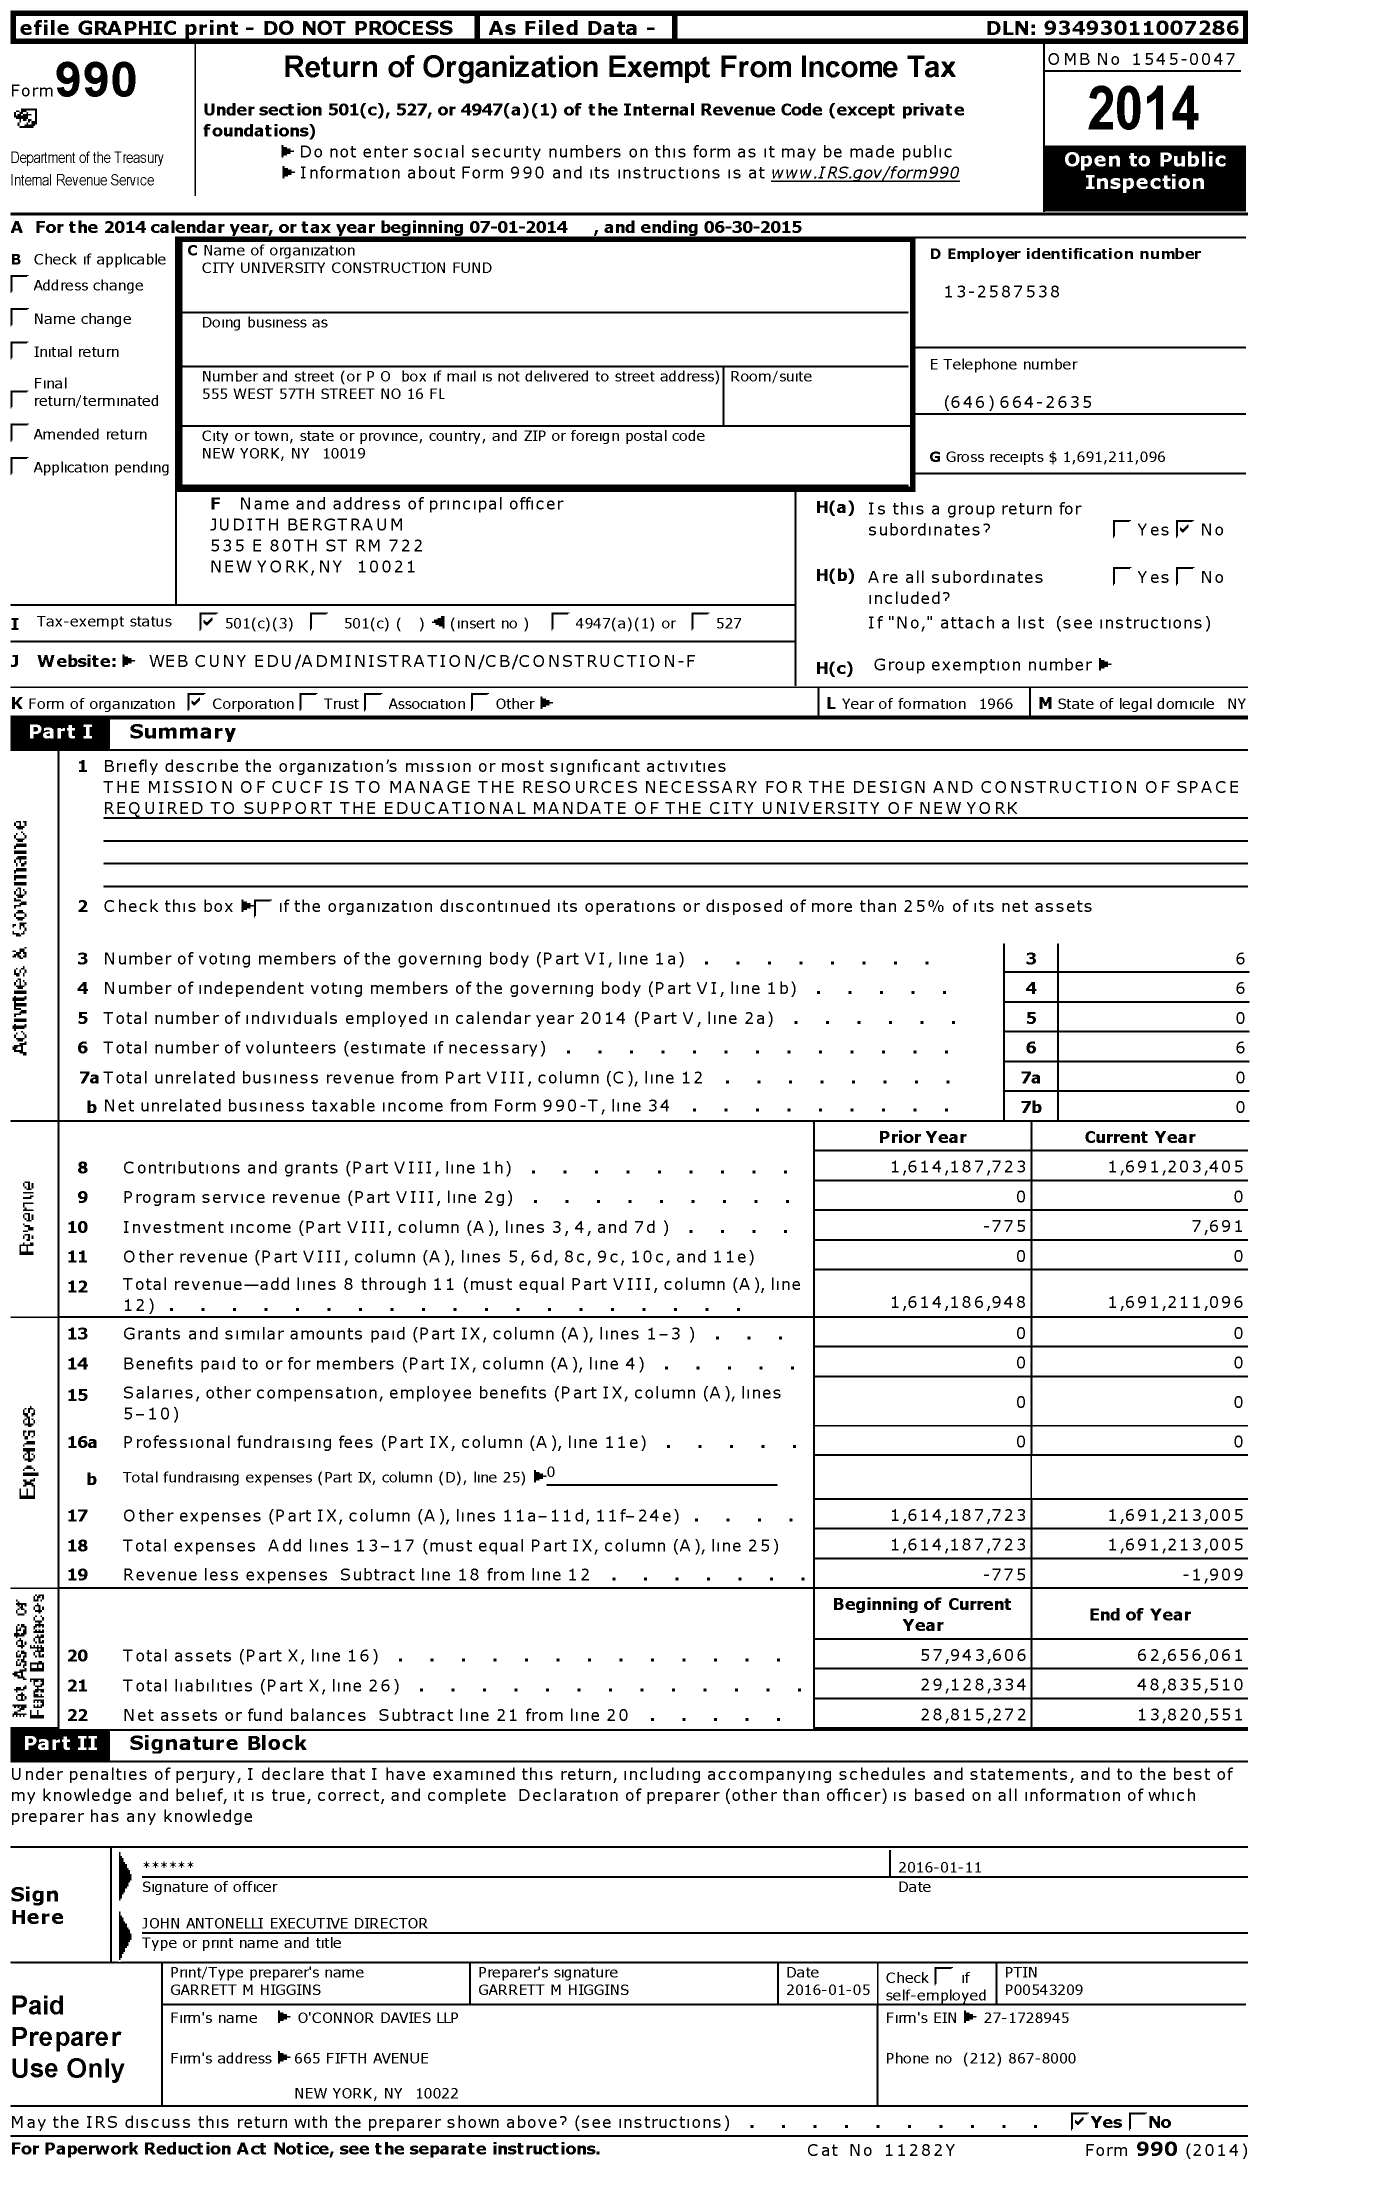 Image of first page of 2014 Form 990 for City University Construction Fund (CUCF)